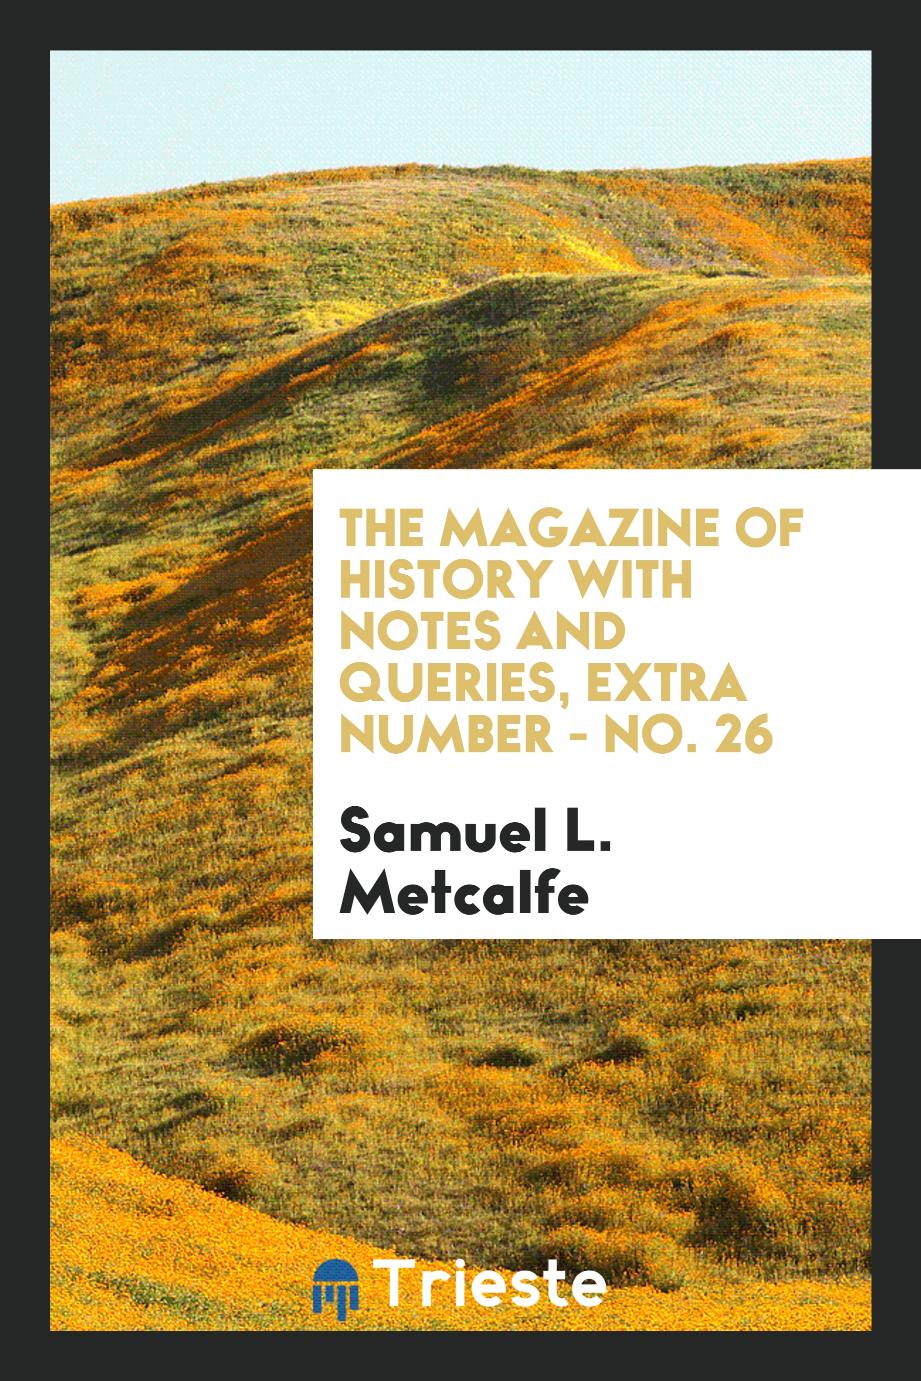 the magazine of history with notes and queries, extra number - No. 26